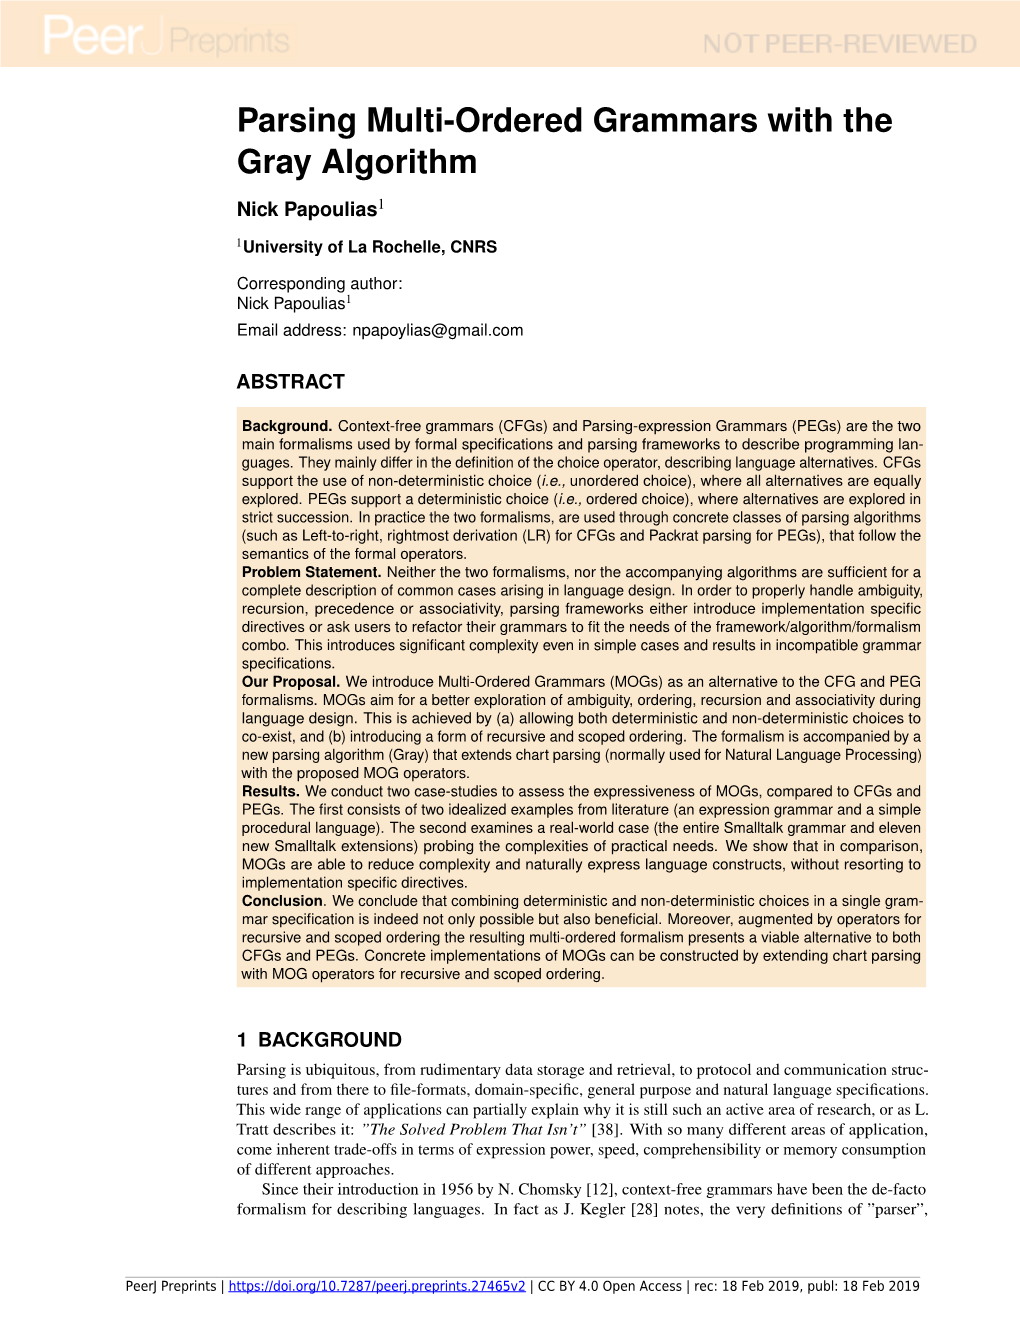 Parsing Multi-Ordered Grammars with the Gray Algorithm